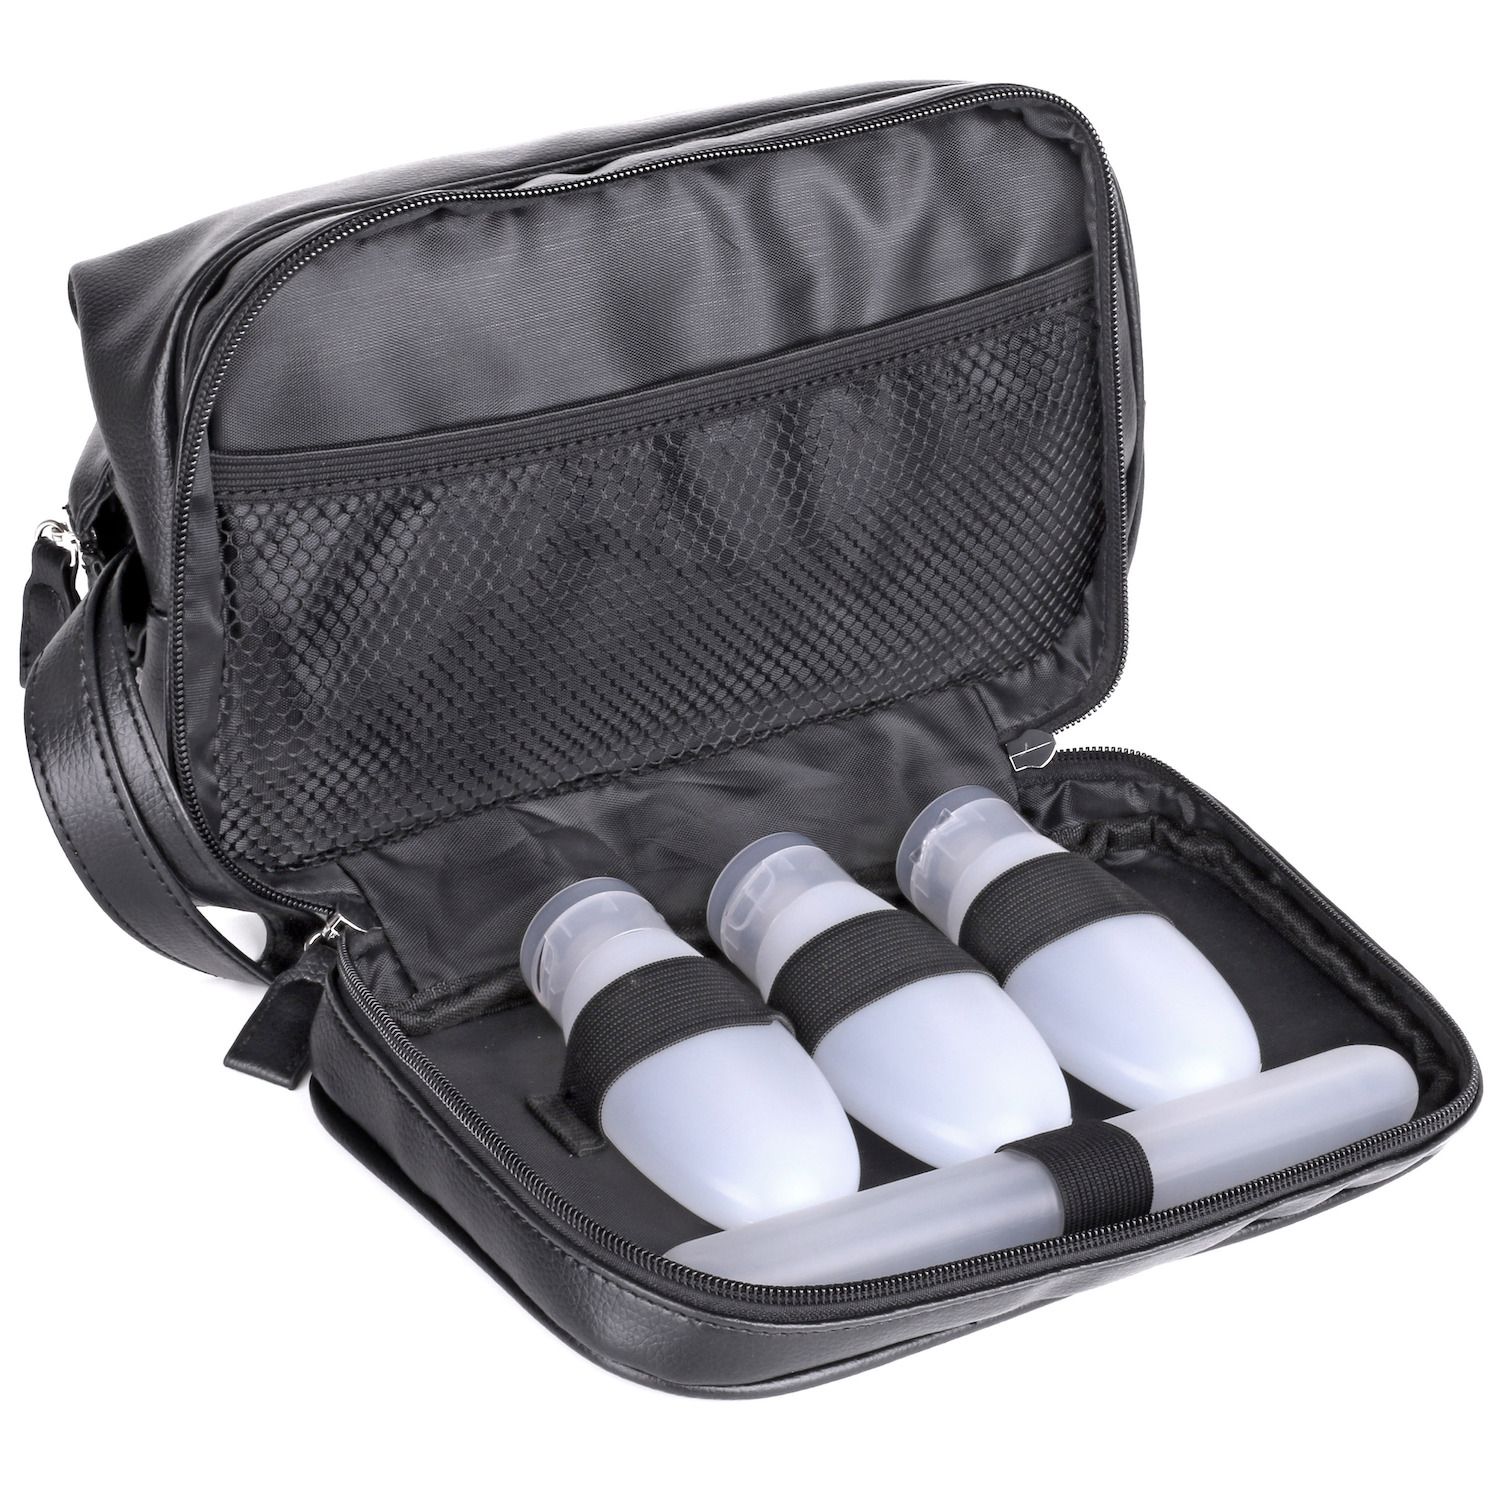 Clear travel-sized toiletry container allow for easy packing and quicker time through security.